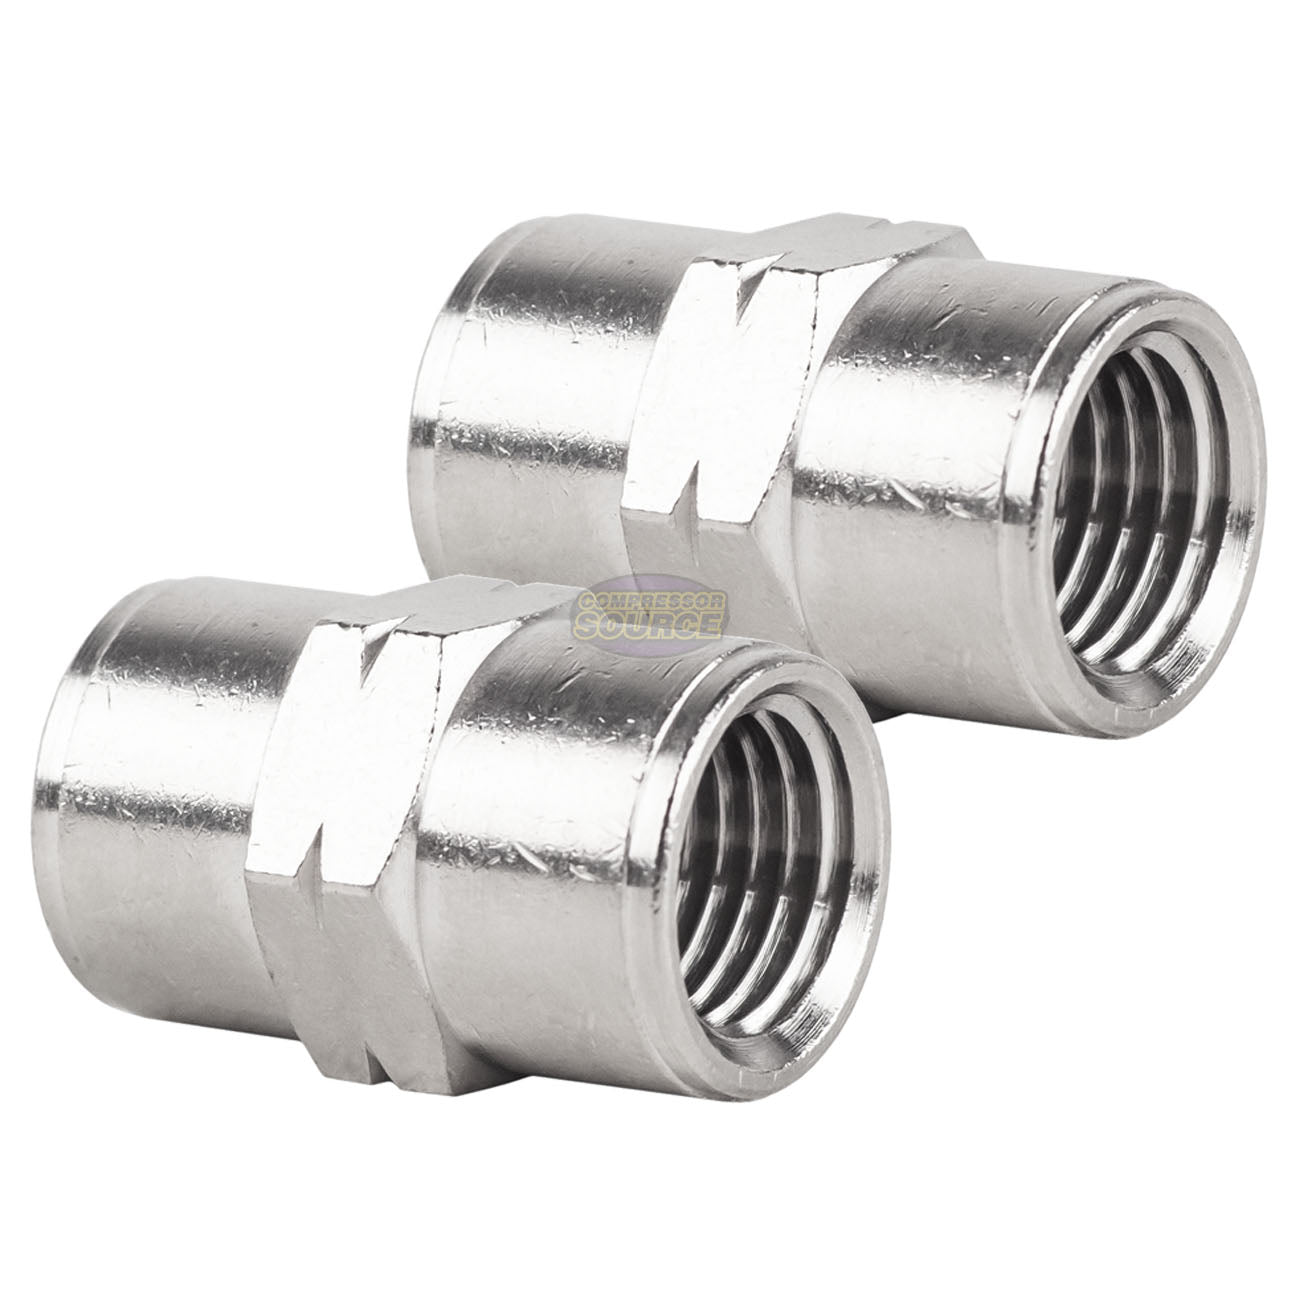 1/4" NPT Female Nickel Plated Brass Pipe Unions Adapter Fitting Connector 2 Pack